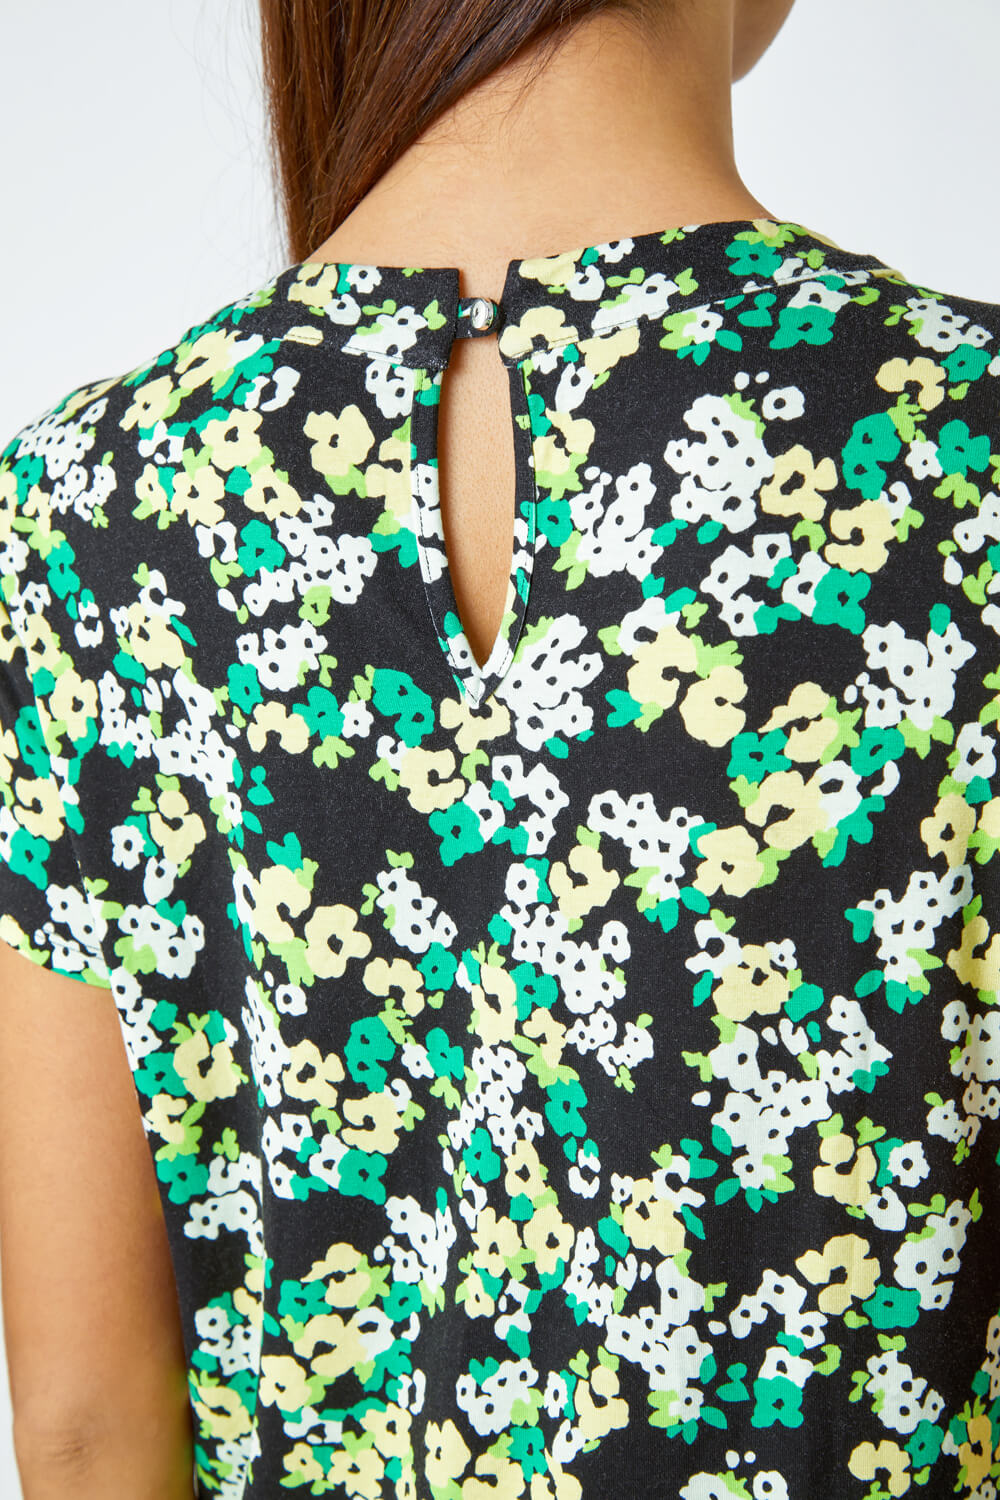 Green Floral Print Pleat Detail Blouse, Image 5 of 5